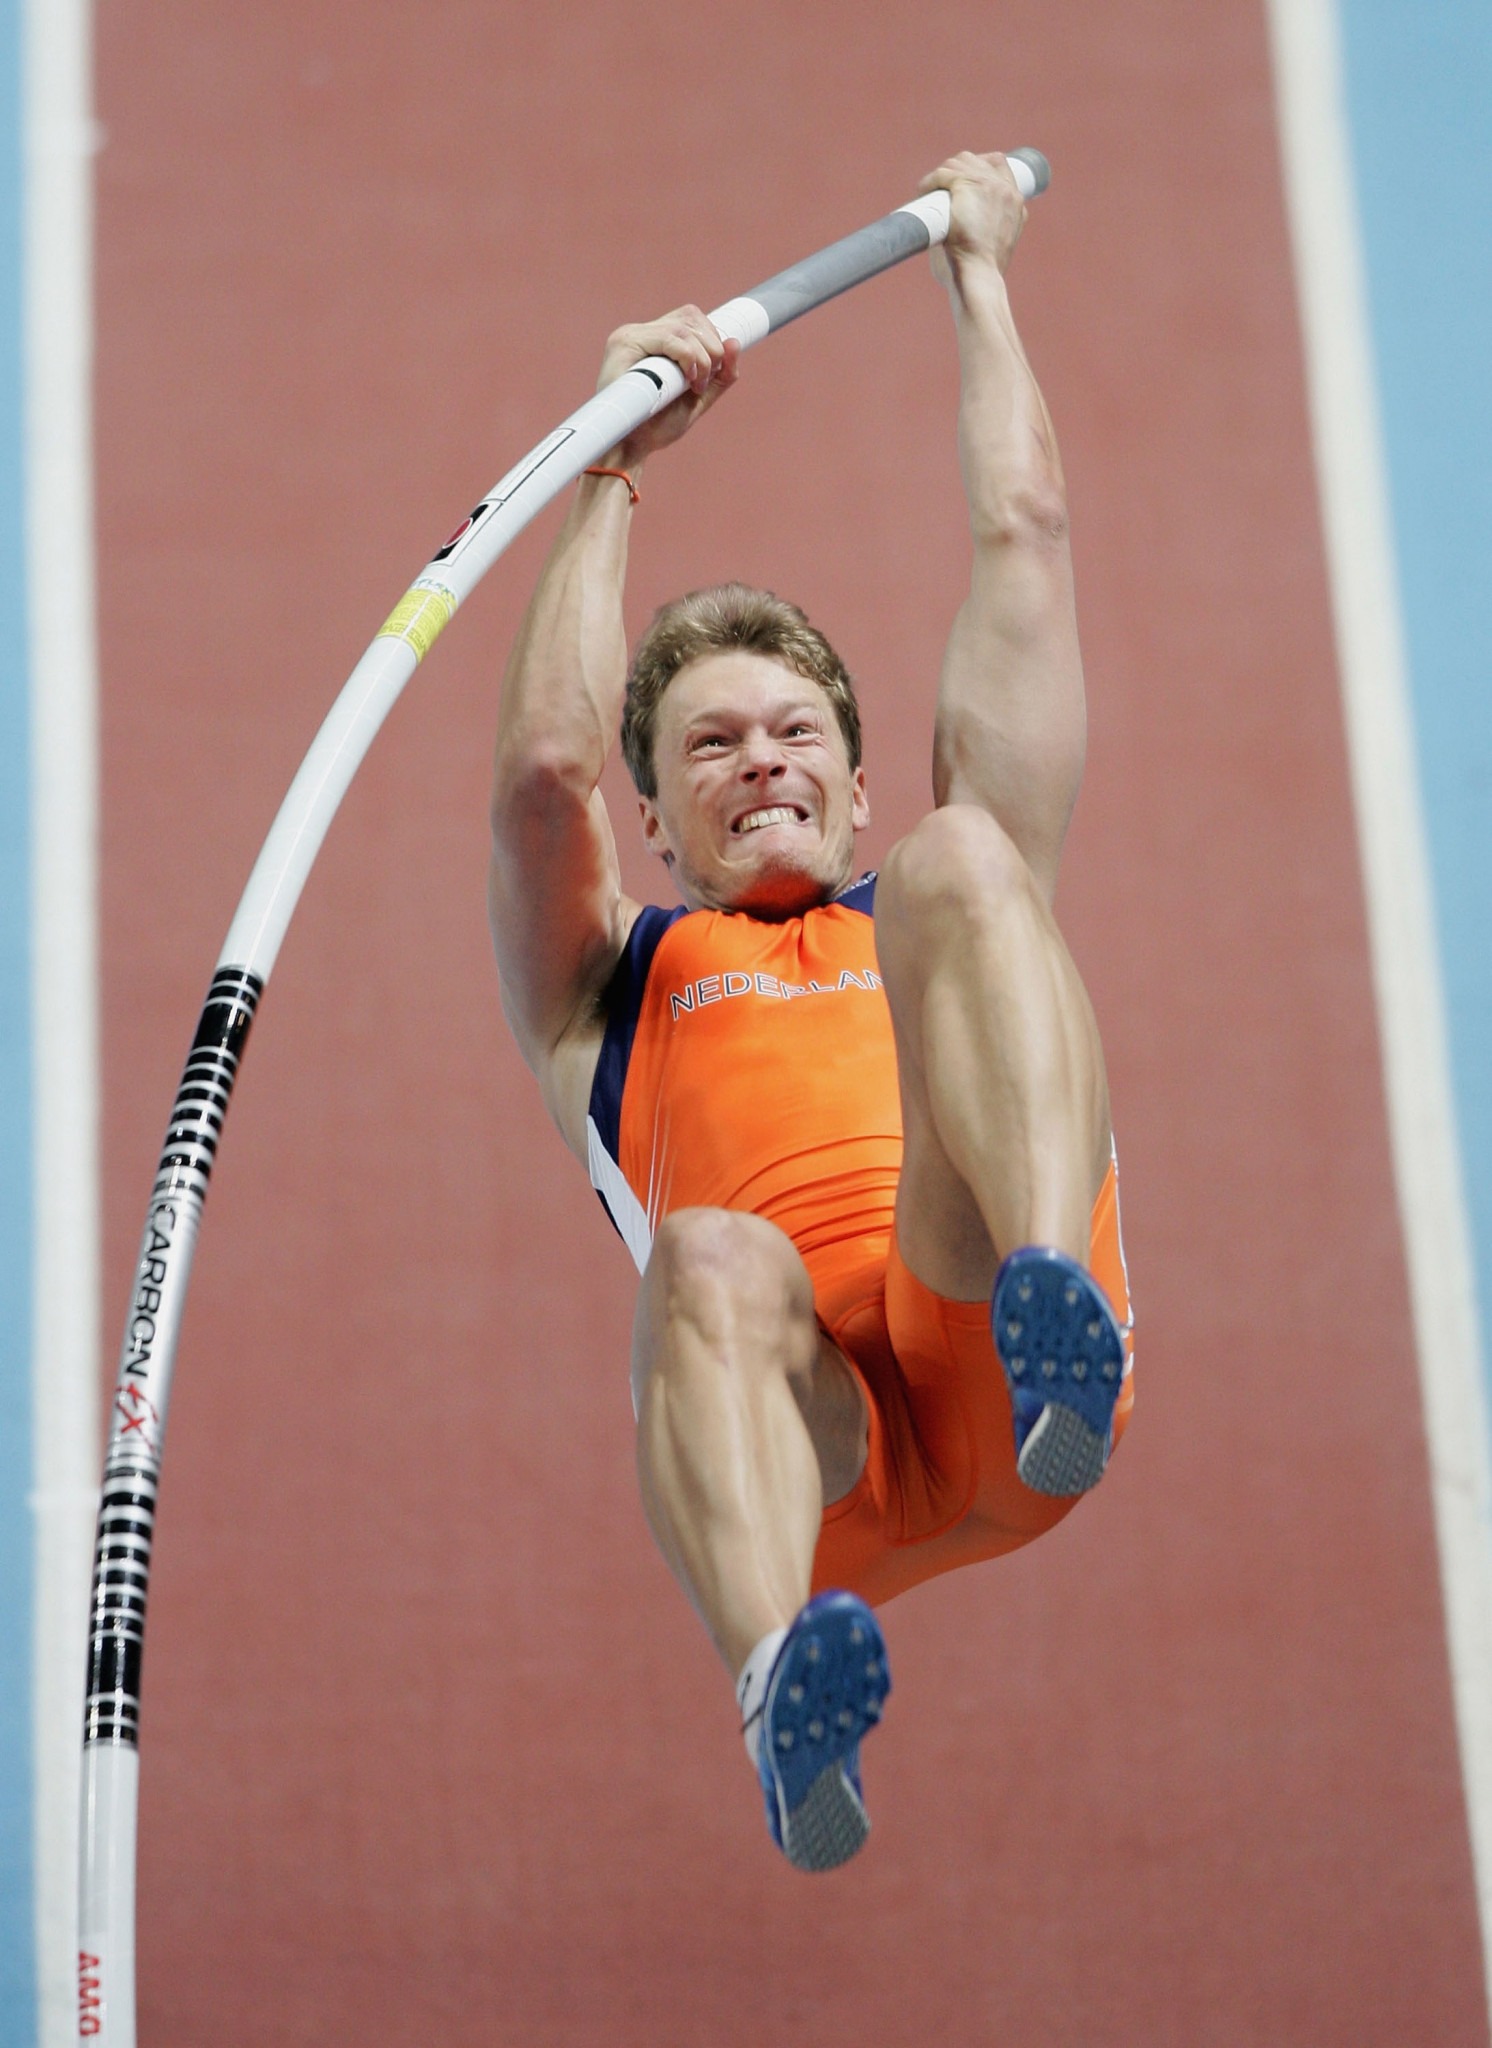 Chiel Warners heads the Dutch Athletes' Committee ©Getty Images